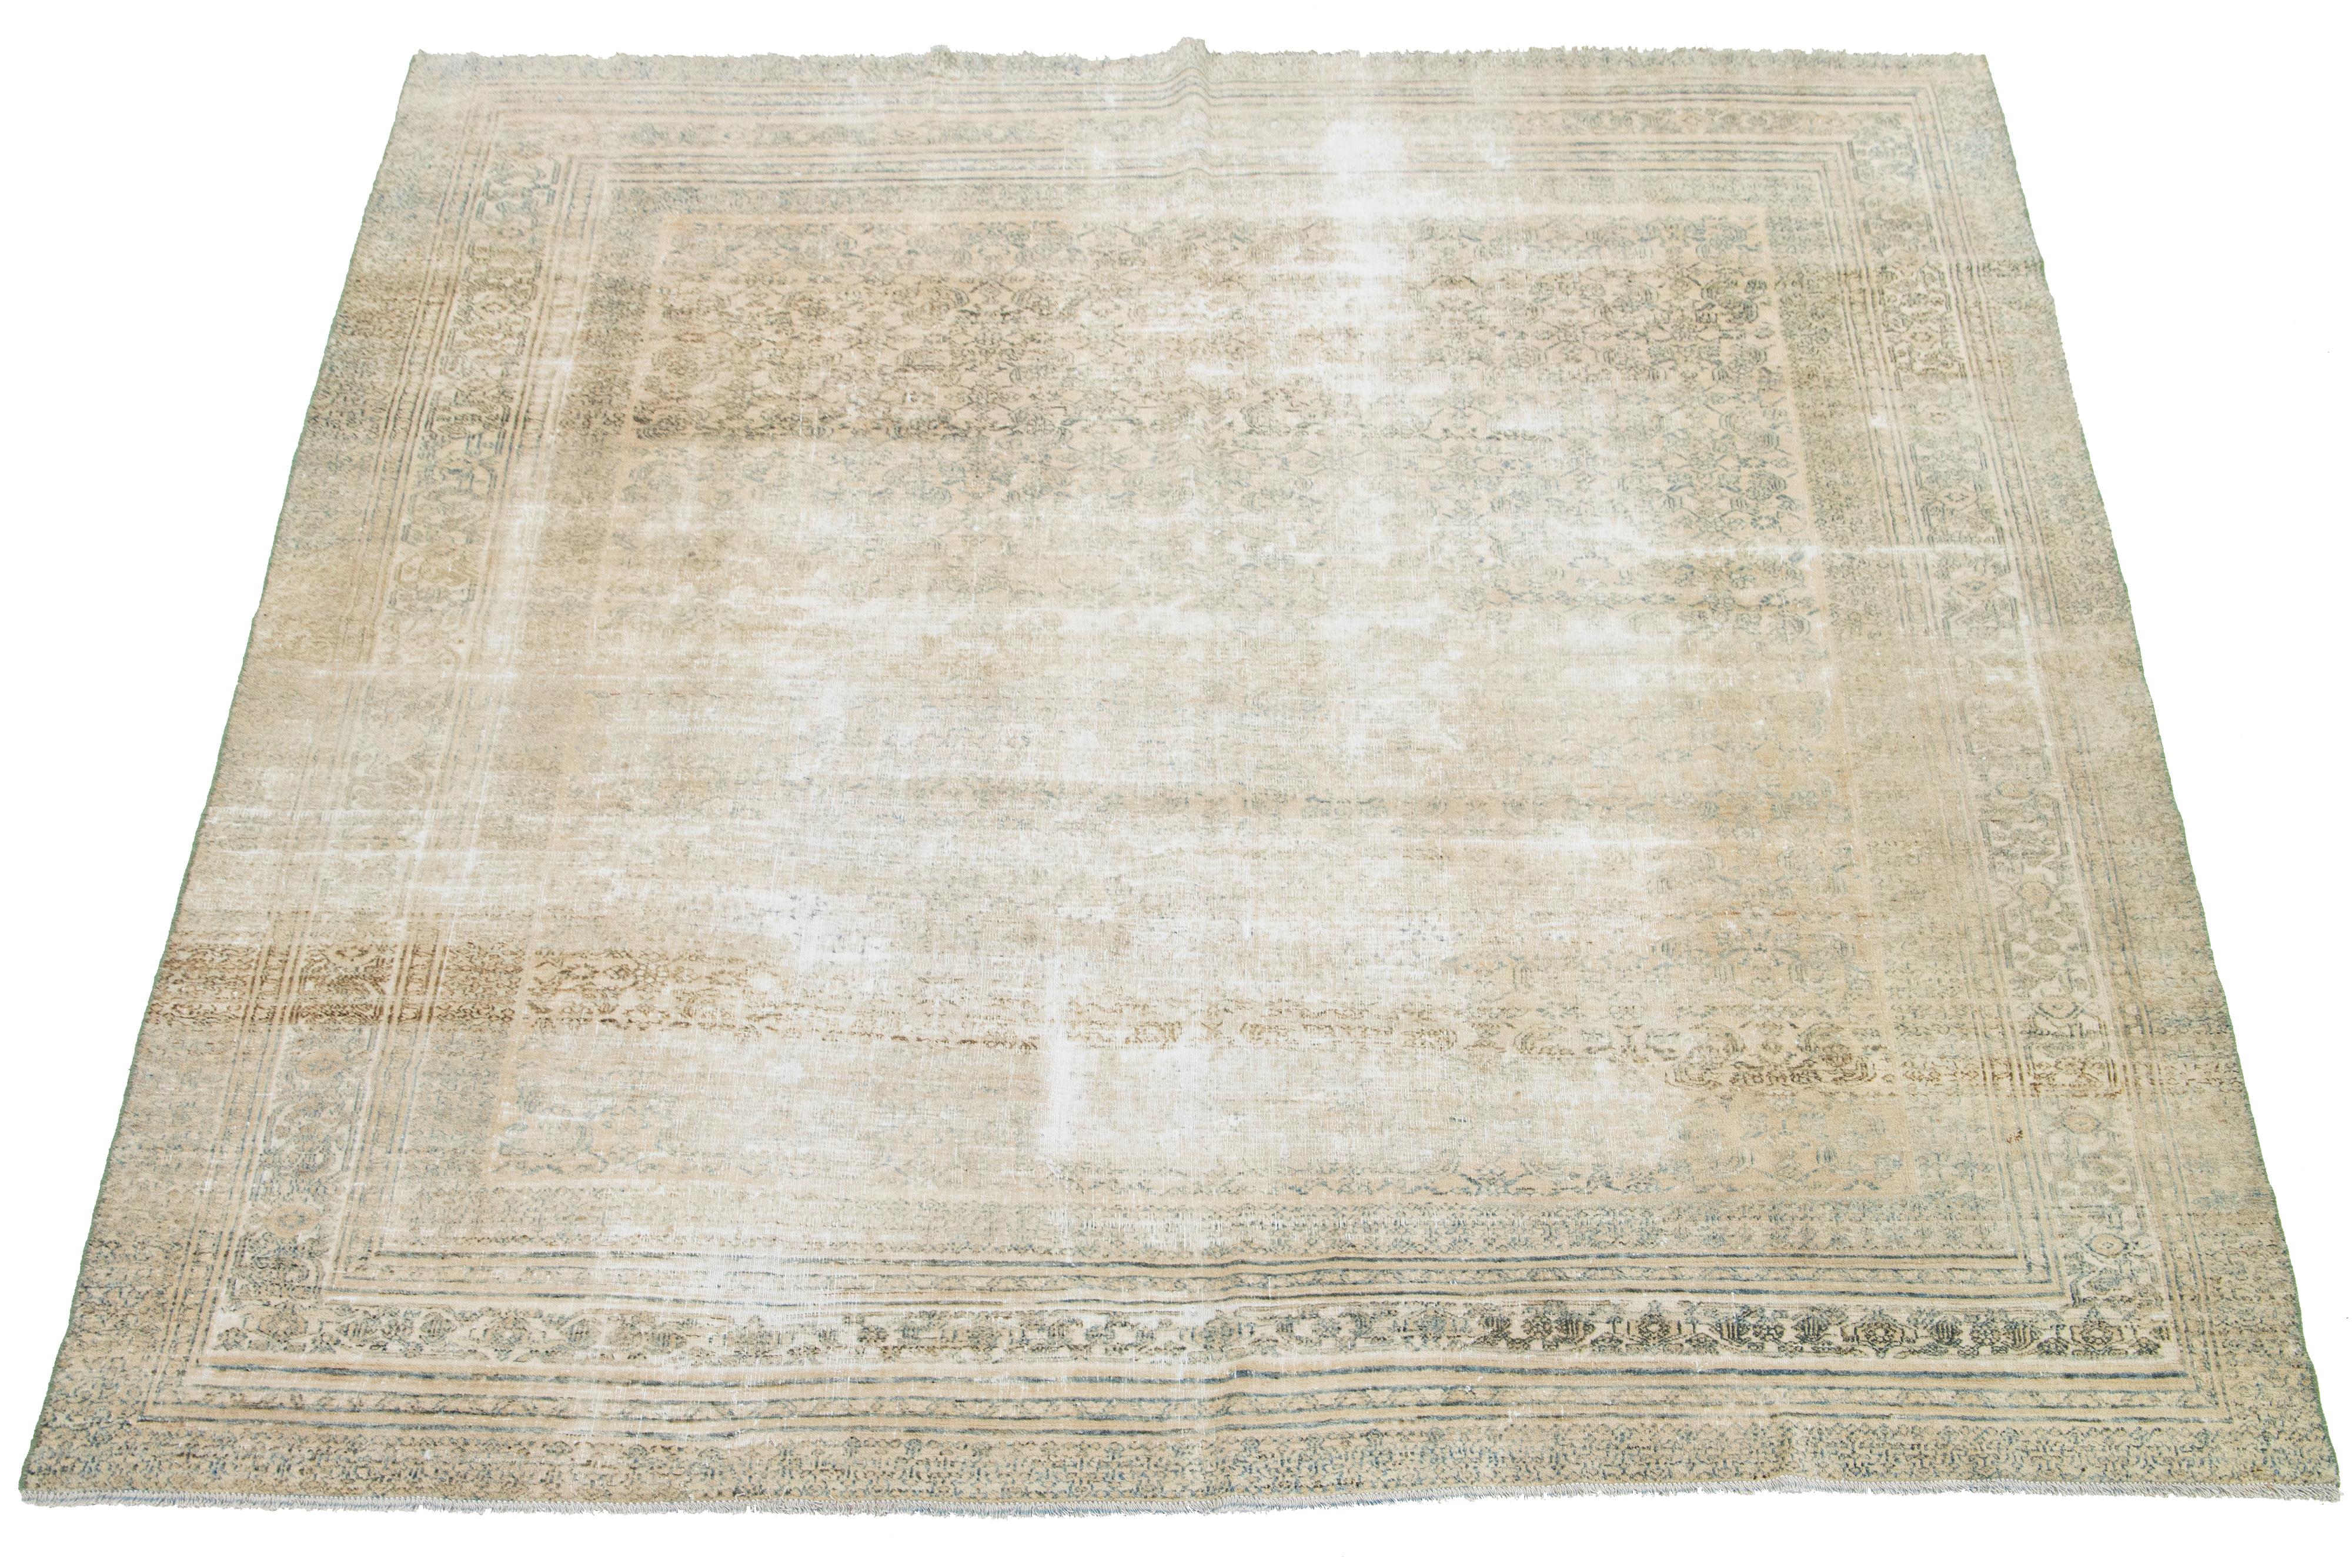 This square antique Malayer wool rug is hand-knotted and has a beige color field. It boasts a stunning all-over design, complemented by gorgeous blue accents.

This rug measures 7'10